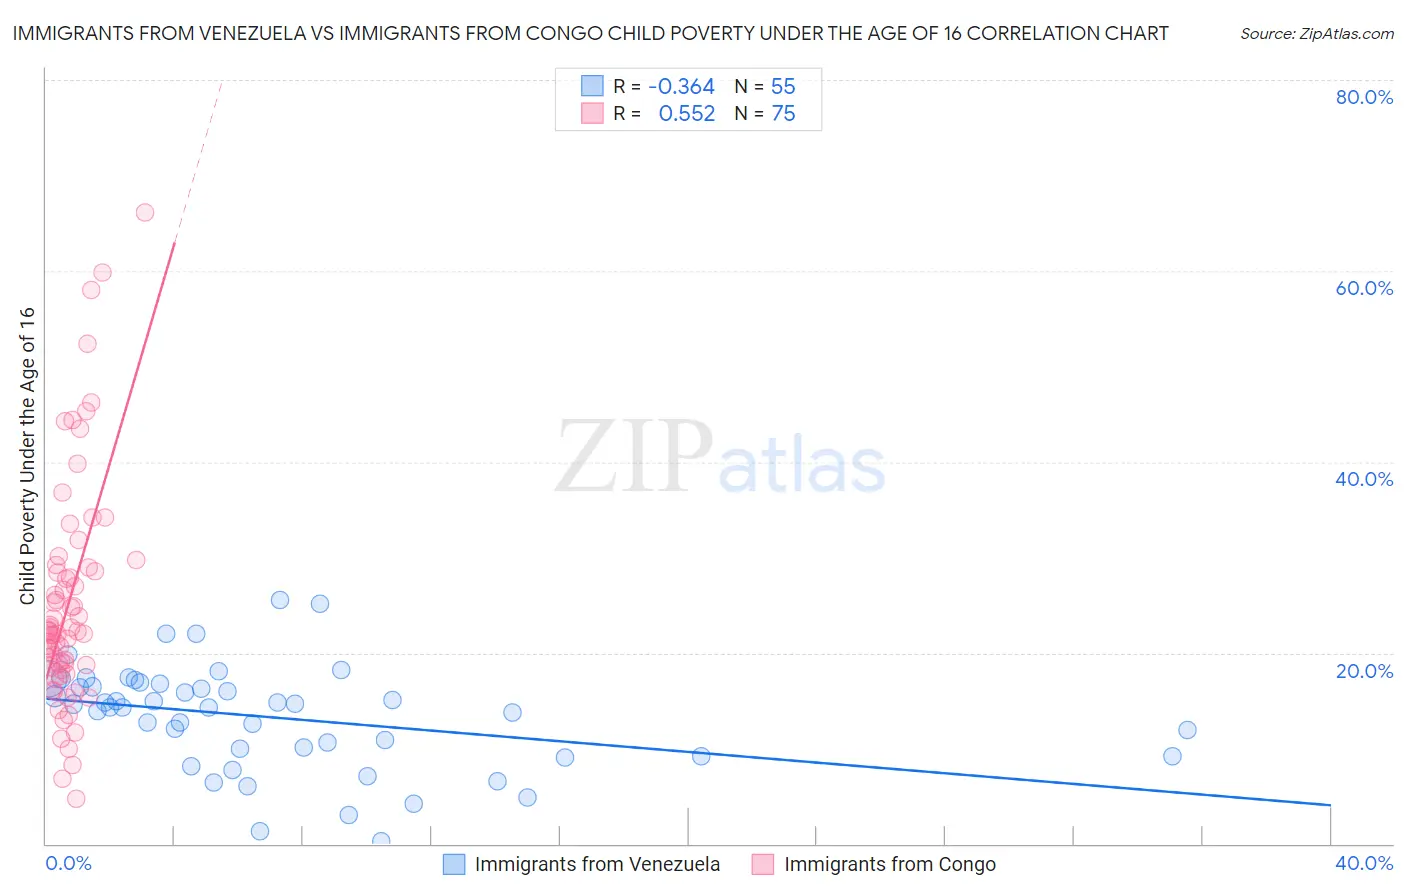 Immigrants from Venezuela vs Immigrants from Congo Child Poverty Under the Age of 16